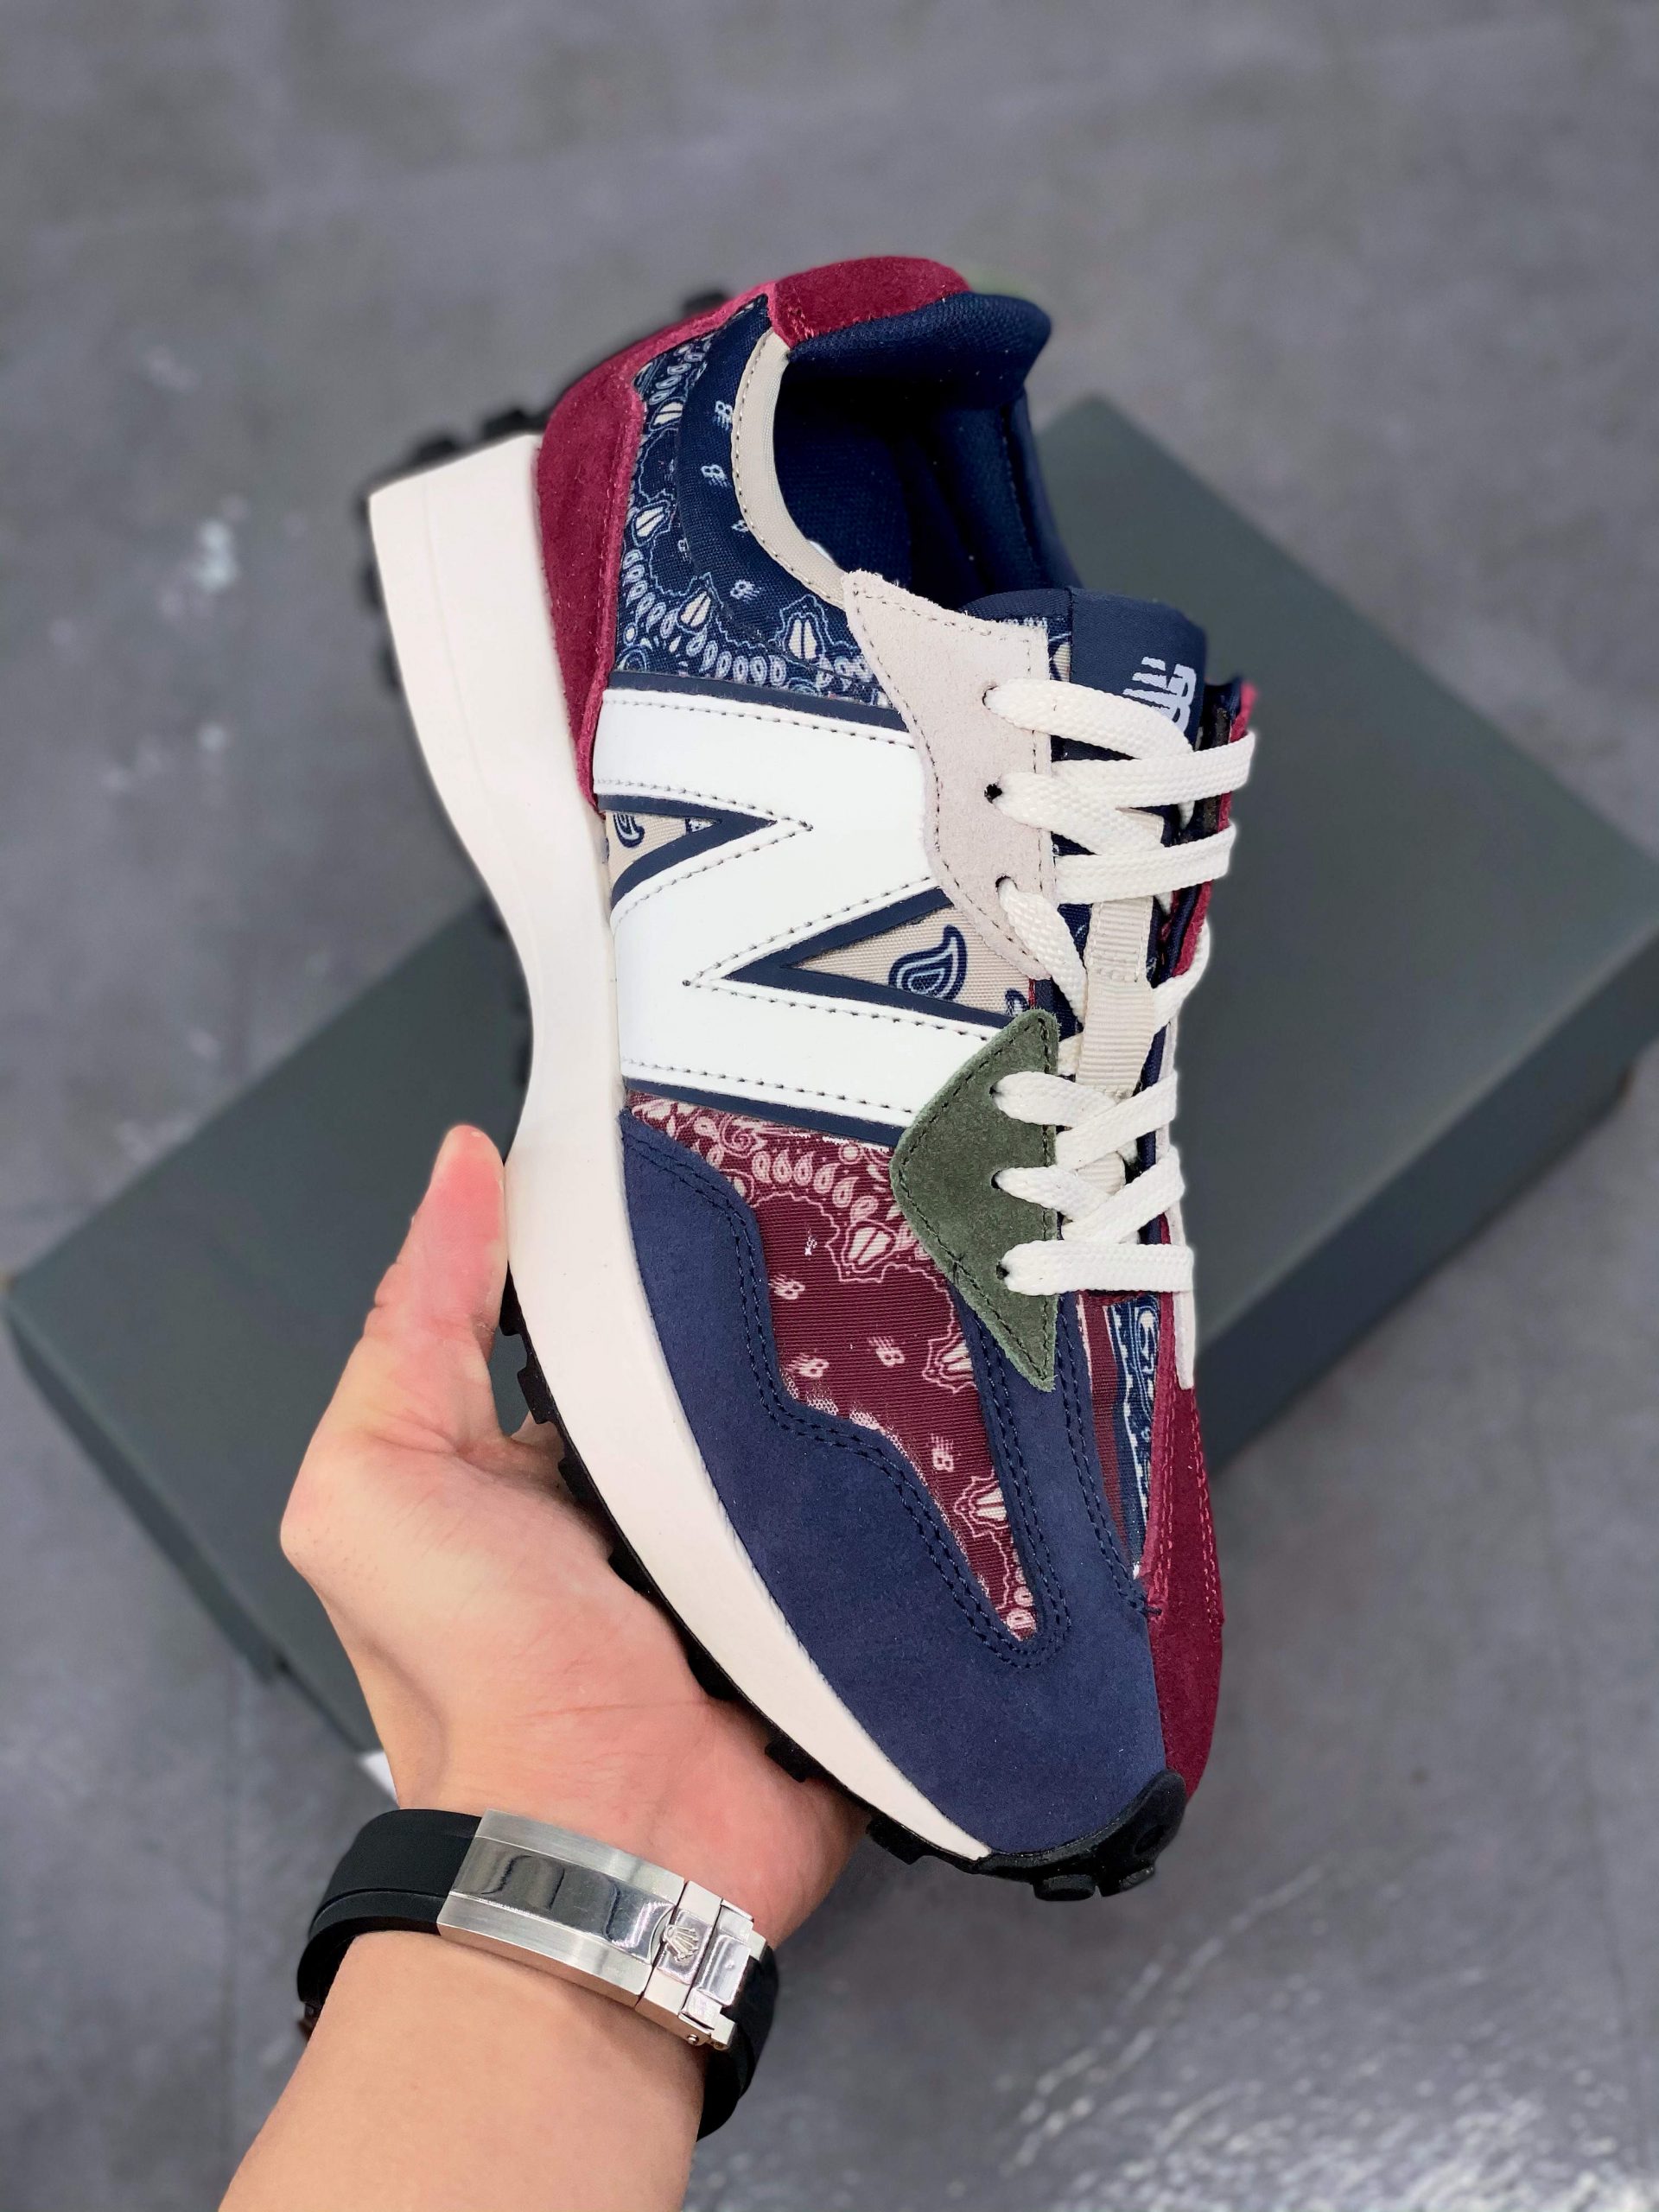 New Balance 327 "Paisley Pack" Red/Blue-Green Shoes